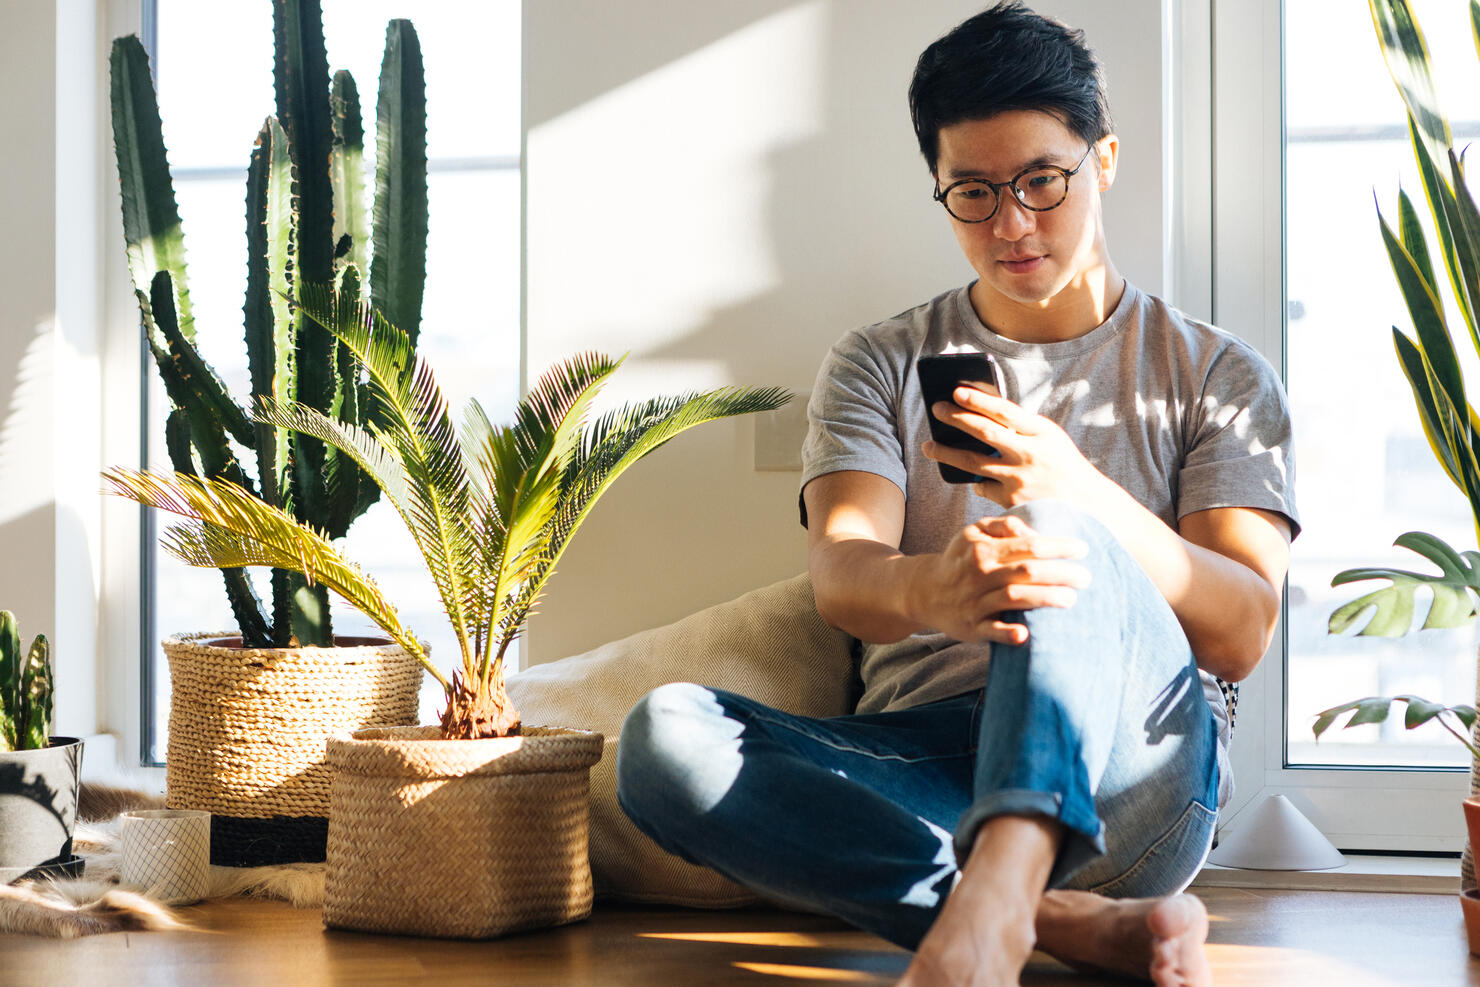 Young Man Using Smartphone At Home With Plants